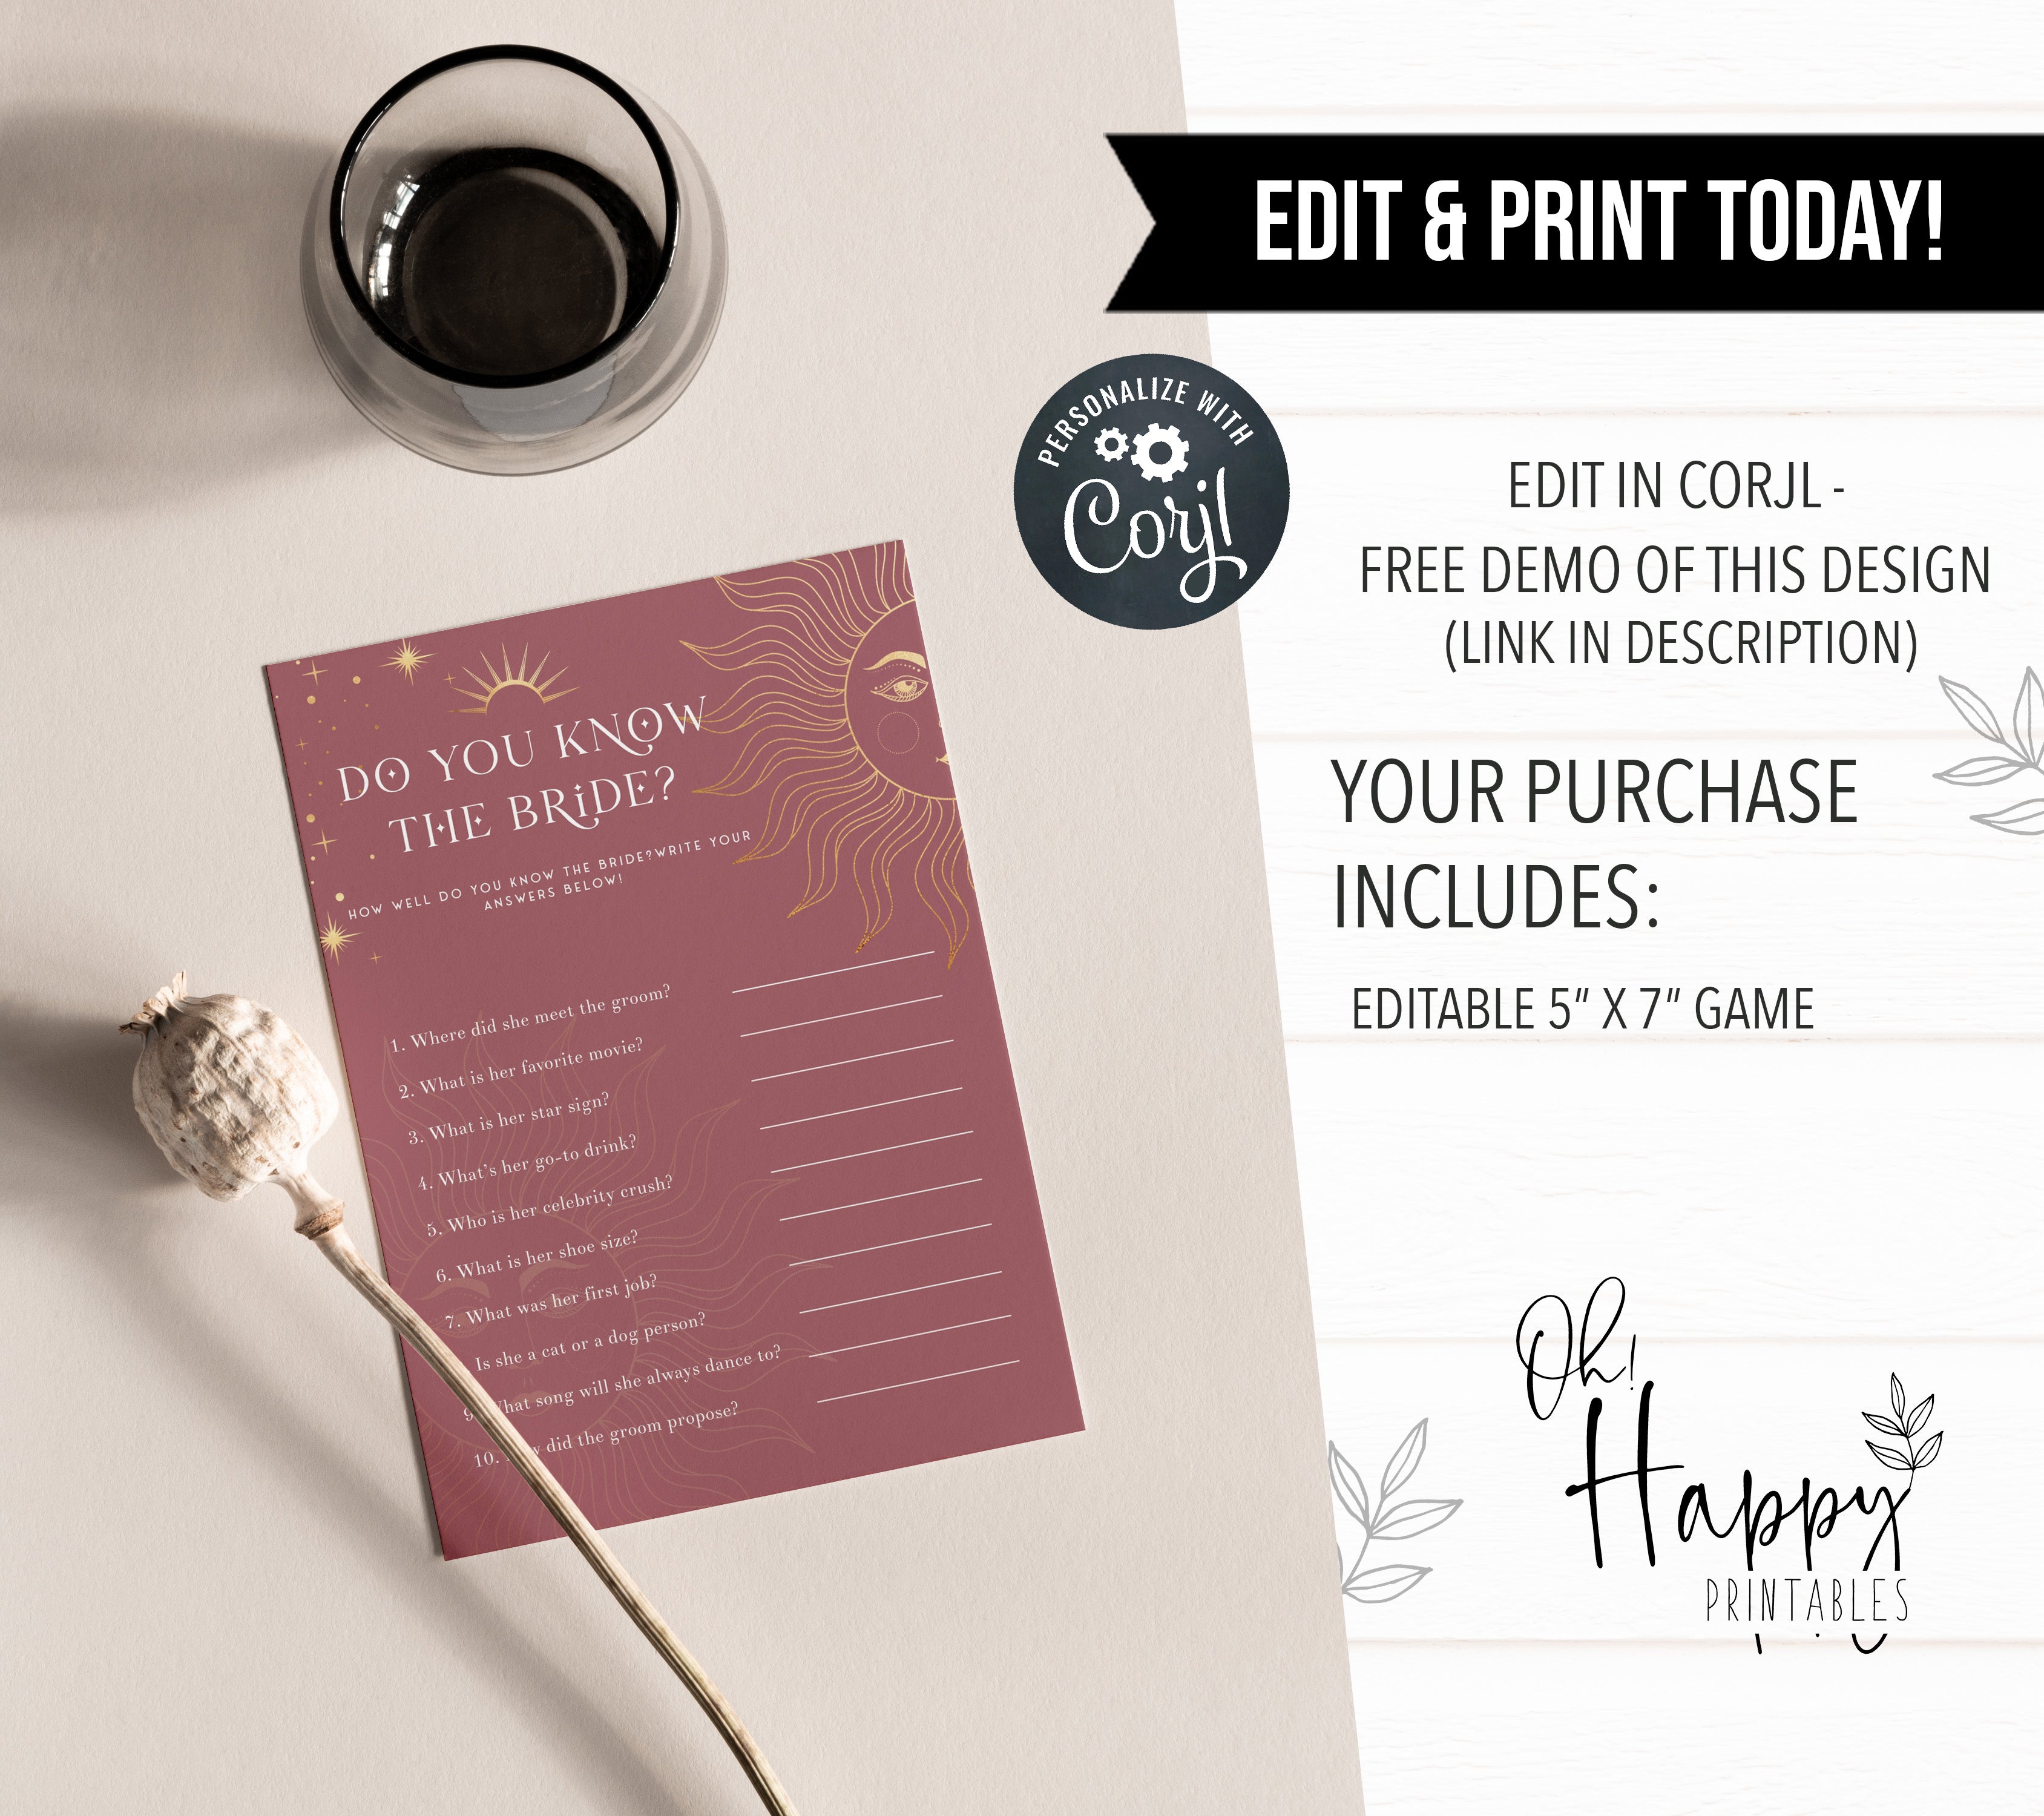 Fully editable and printable bridal shower do you know the bride game with a celestial design. Perfect for a celestial bridal shower themed party